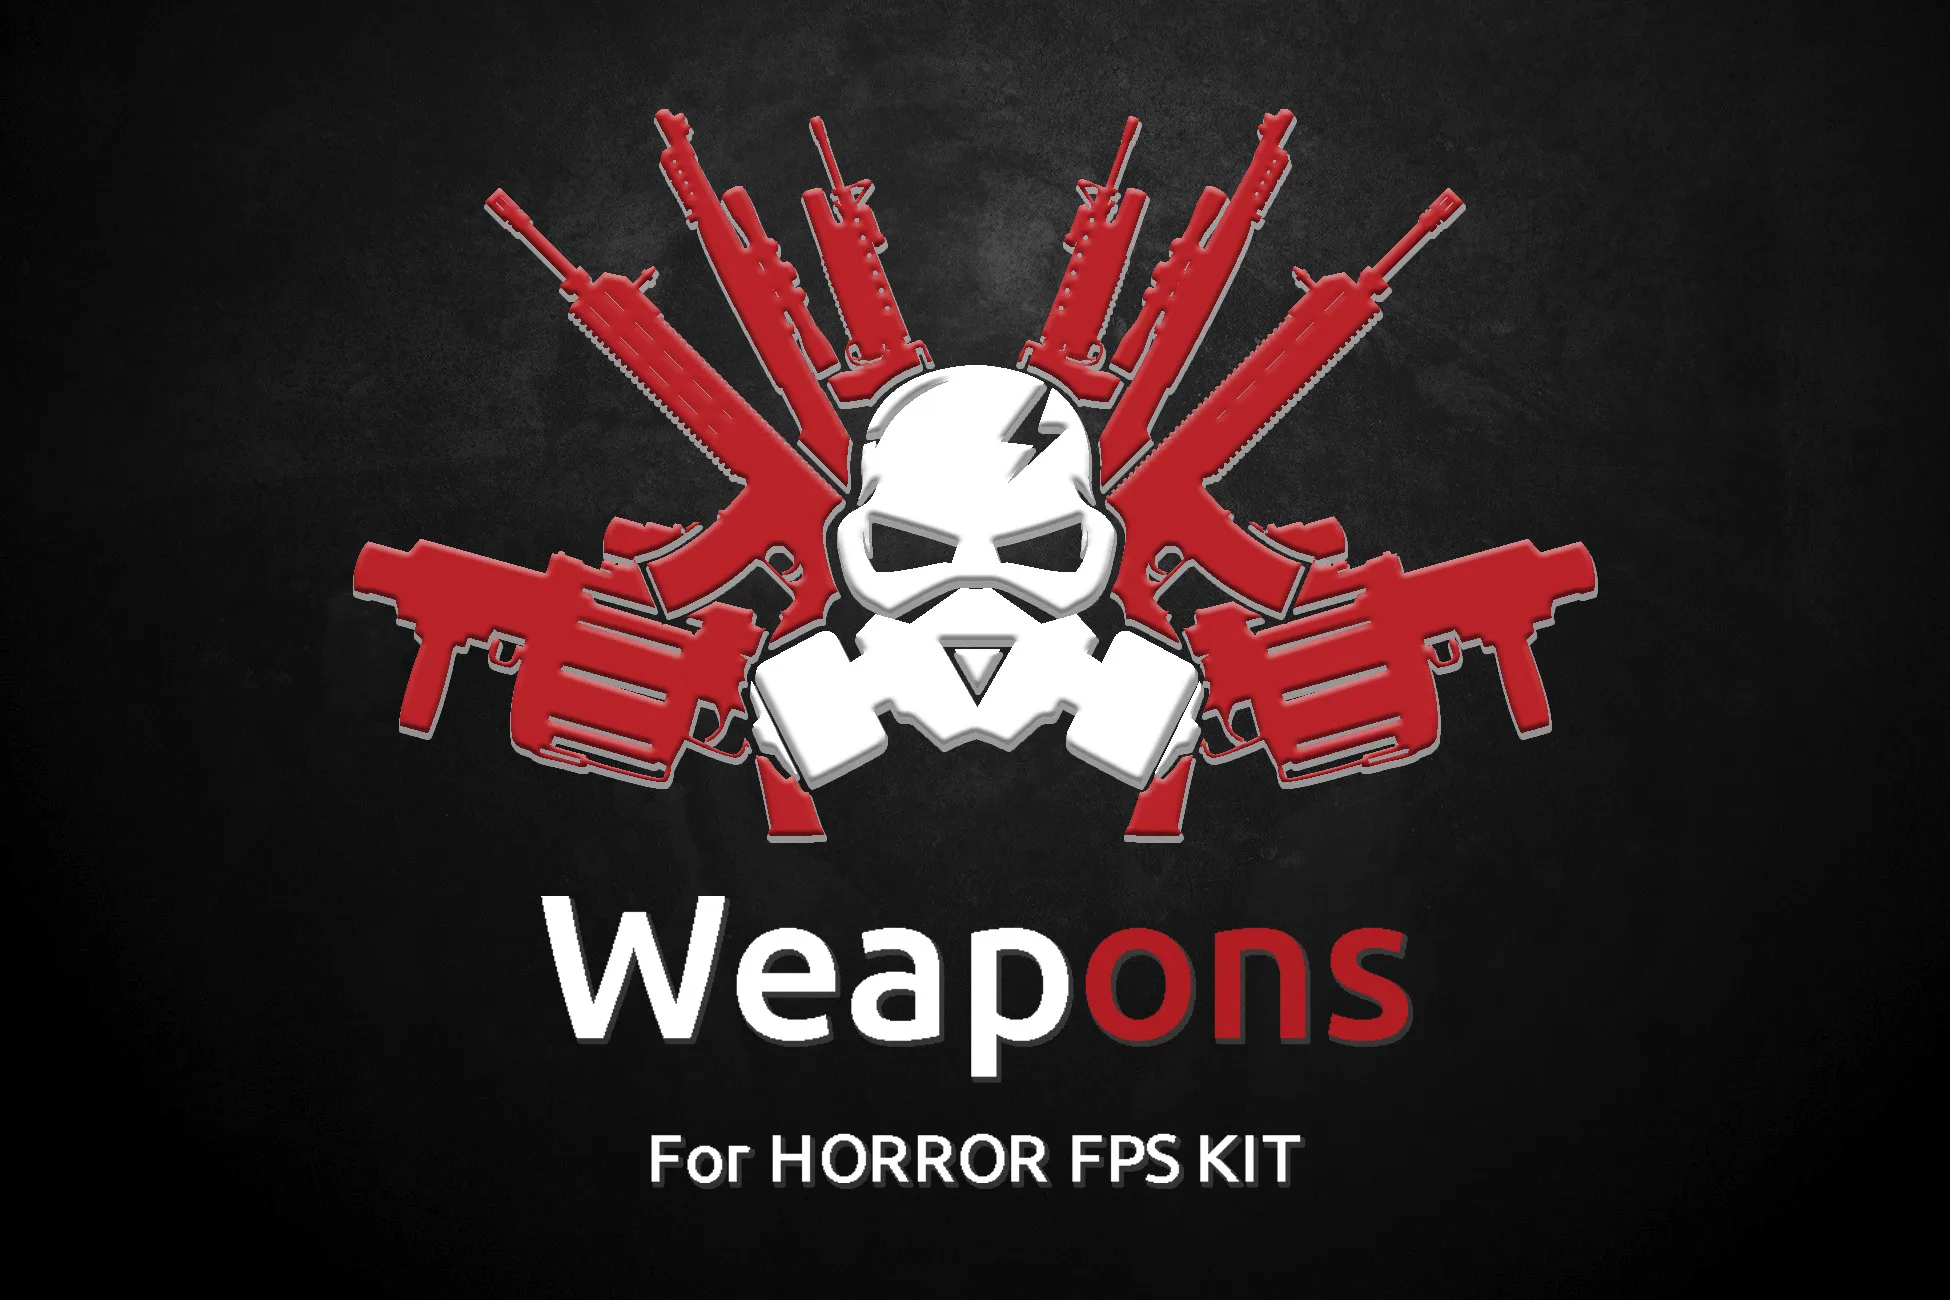 Weapons v0.1.2 Release